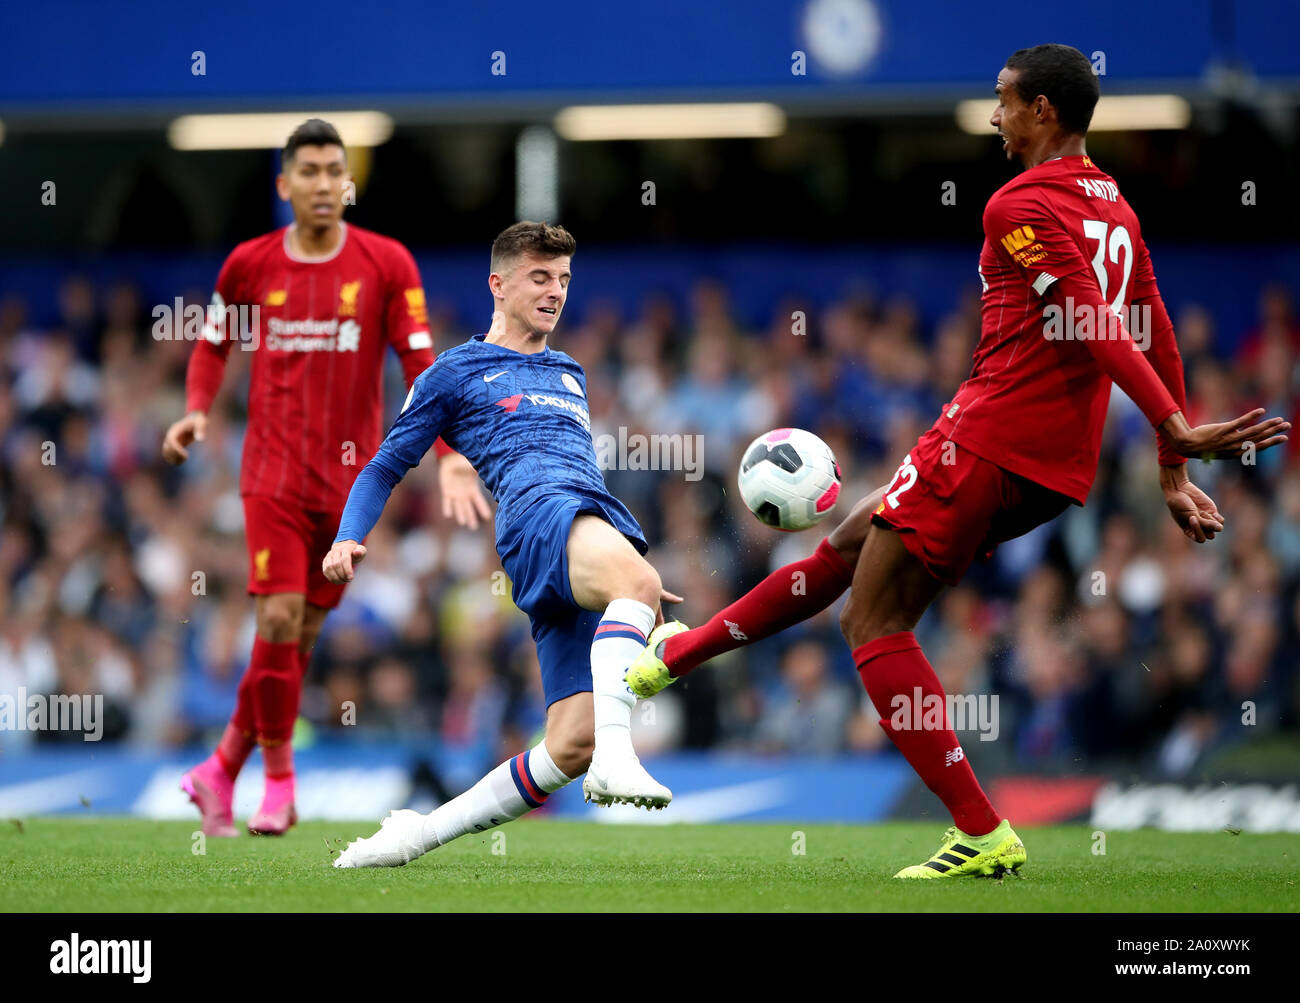 Chelsea's Mason Mount (left) and Liverpool's Joel Matip (right) battle for the ball during the Premier League match at Stamford Bridge, London. Stock Photo